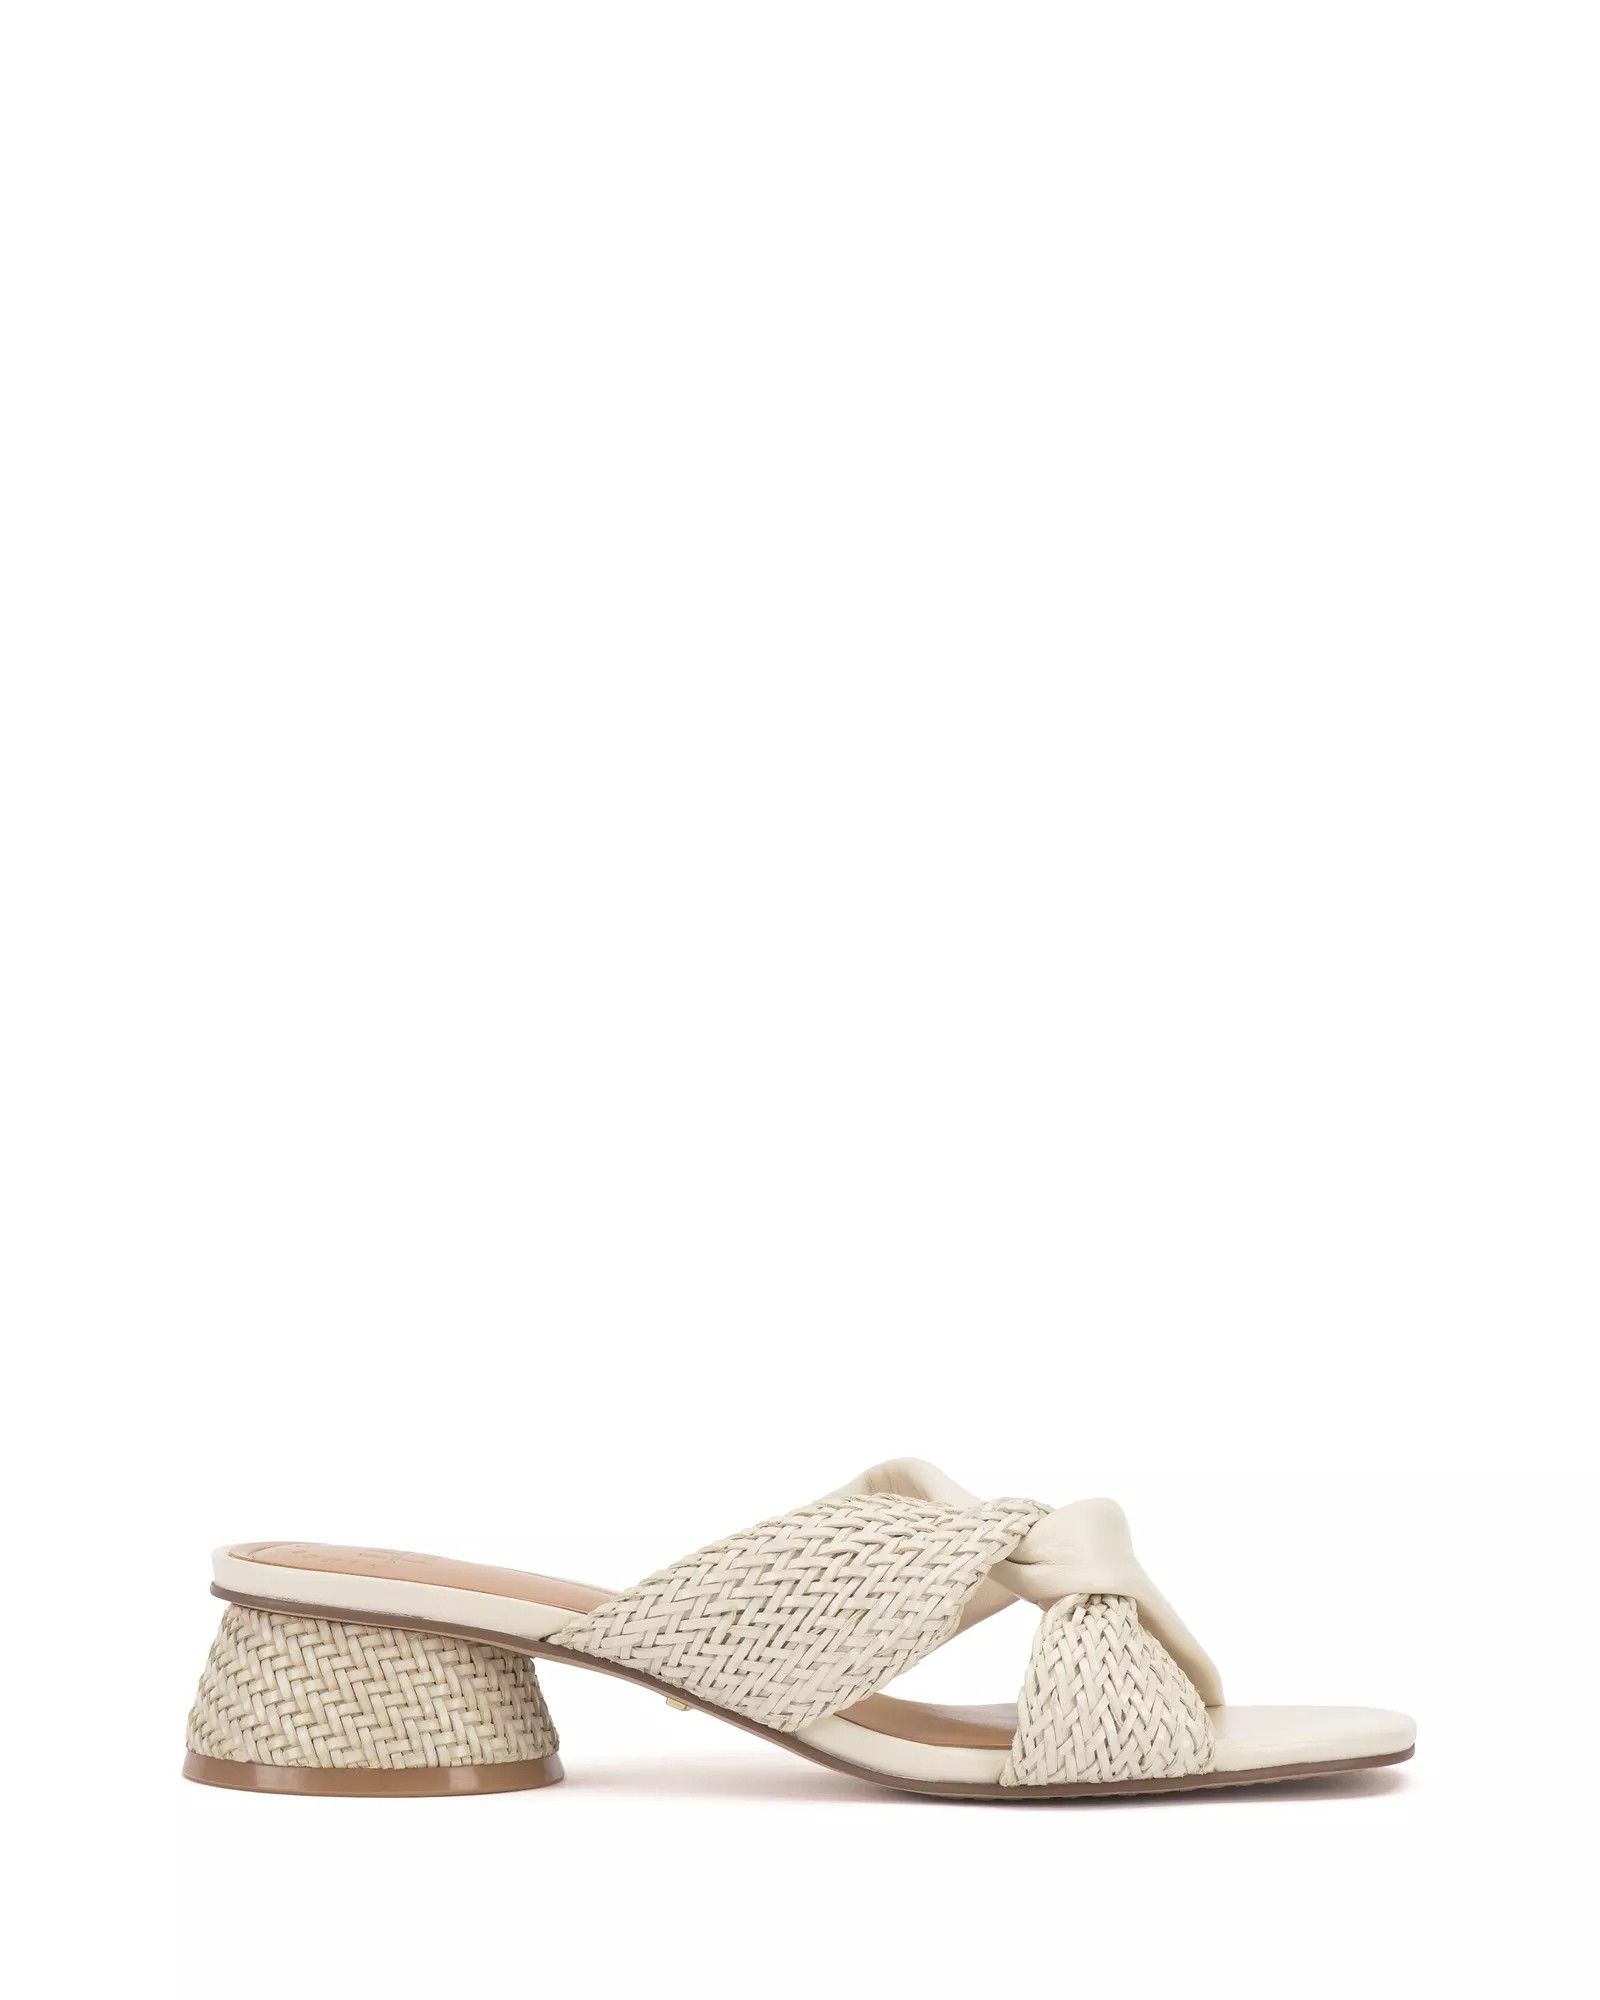 Vince Camuto VC x Laura Beverlin Willow Sandal | Vince Camuto